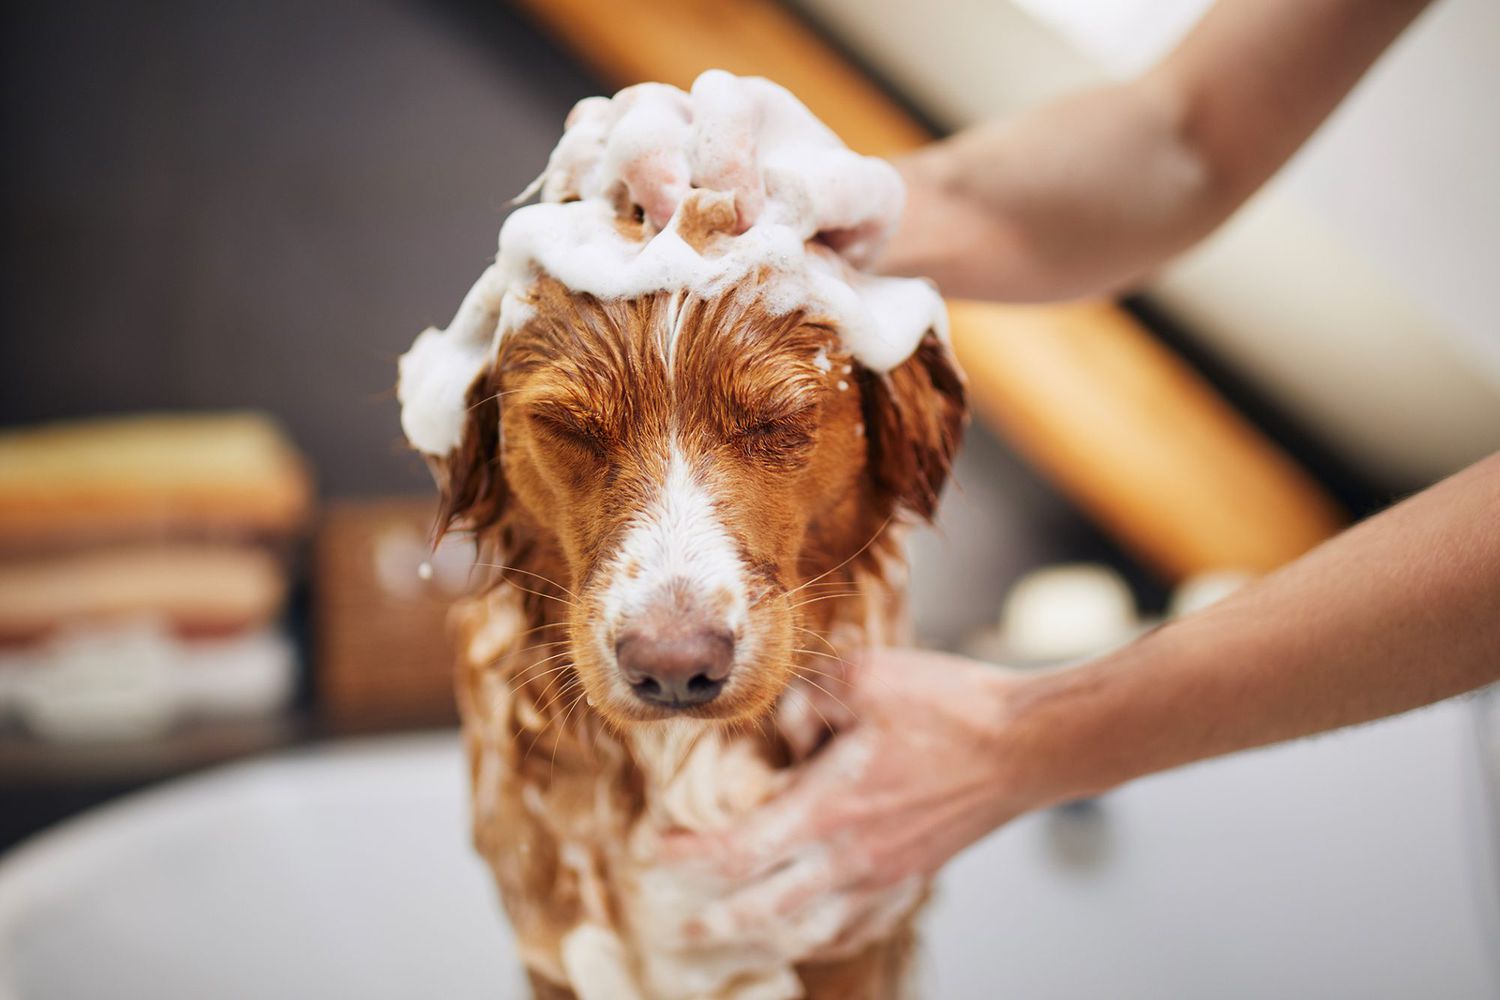 8 Tips for Bathing Your Dog This Winter